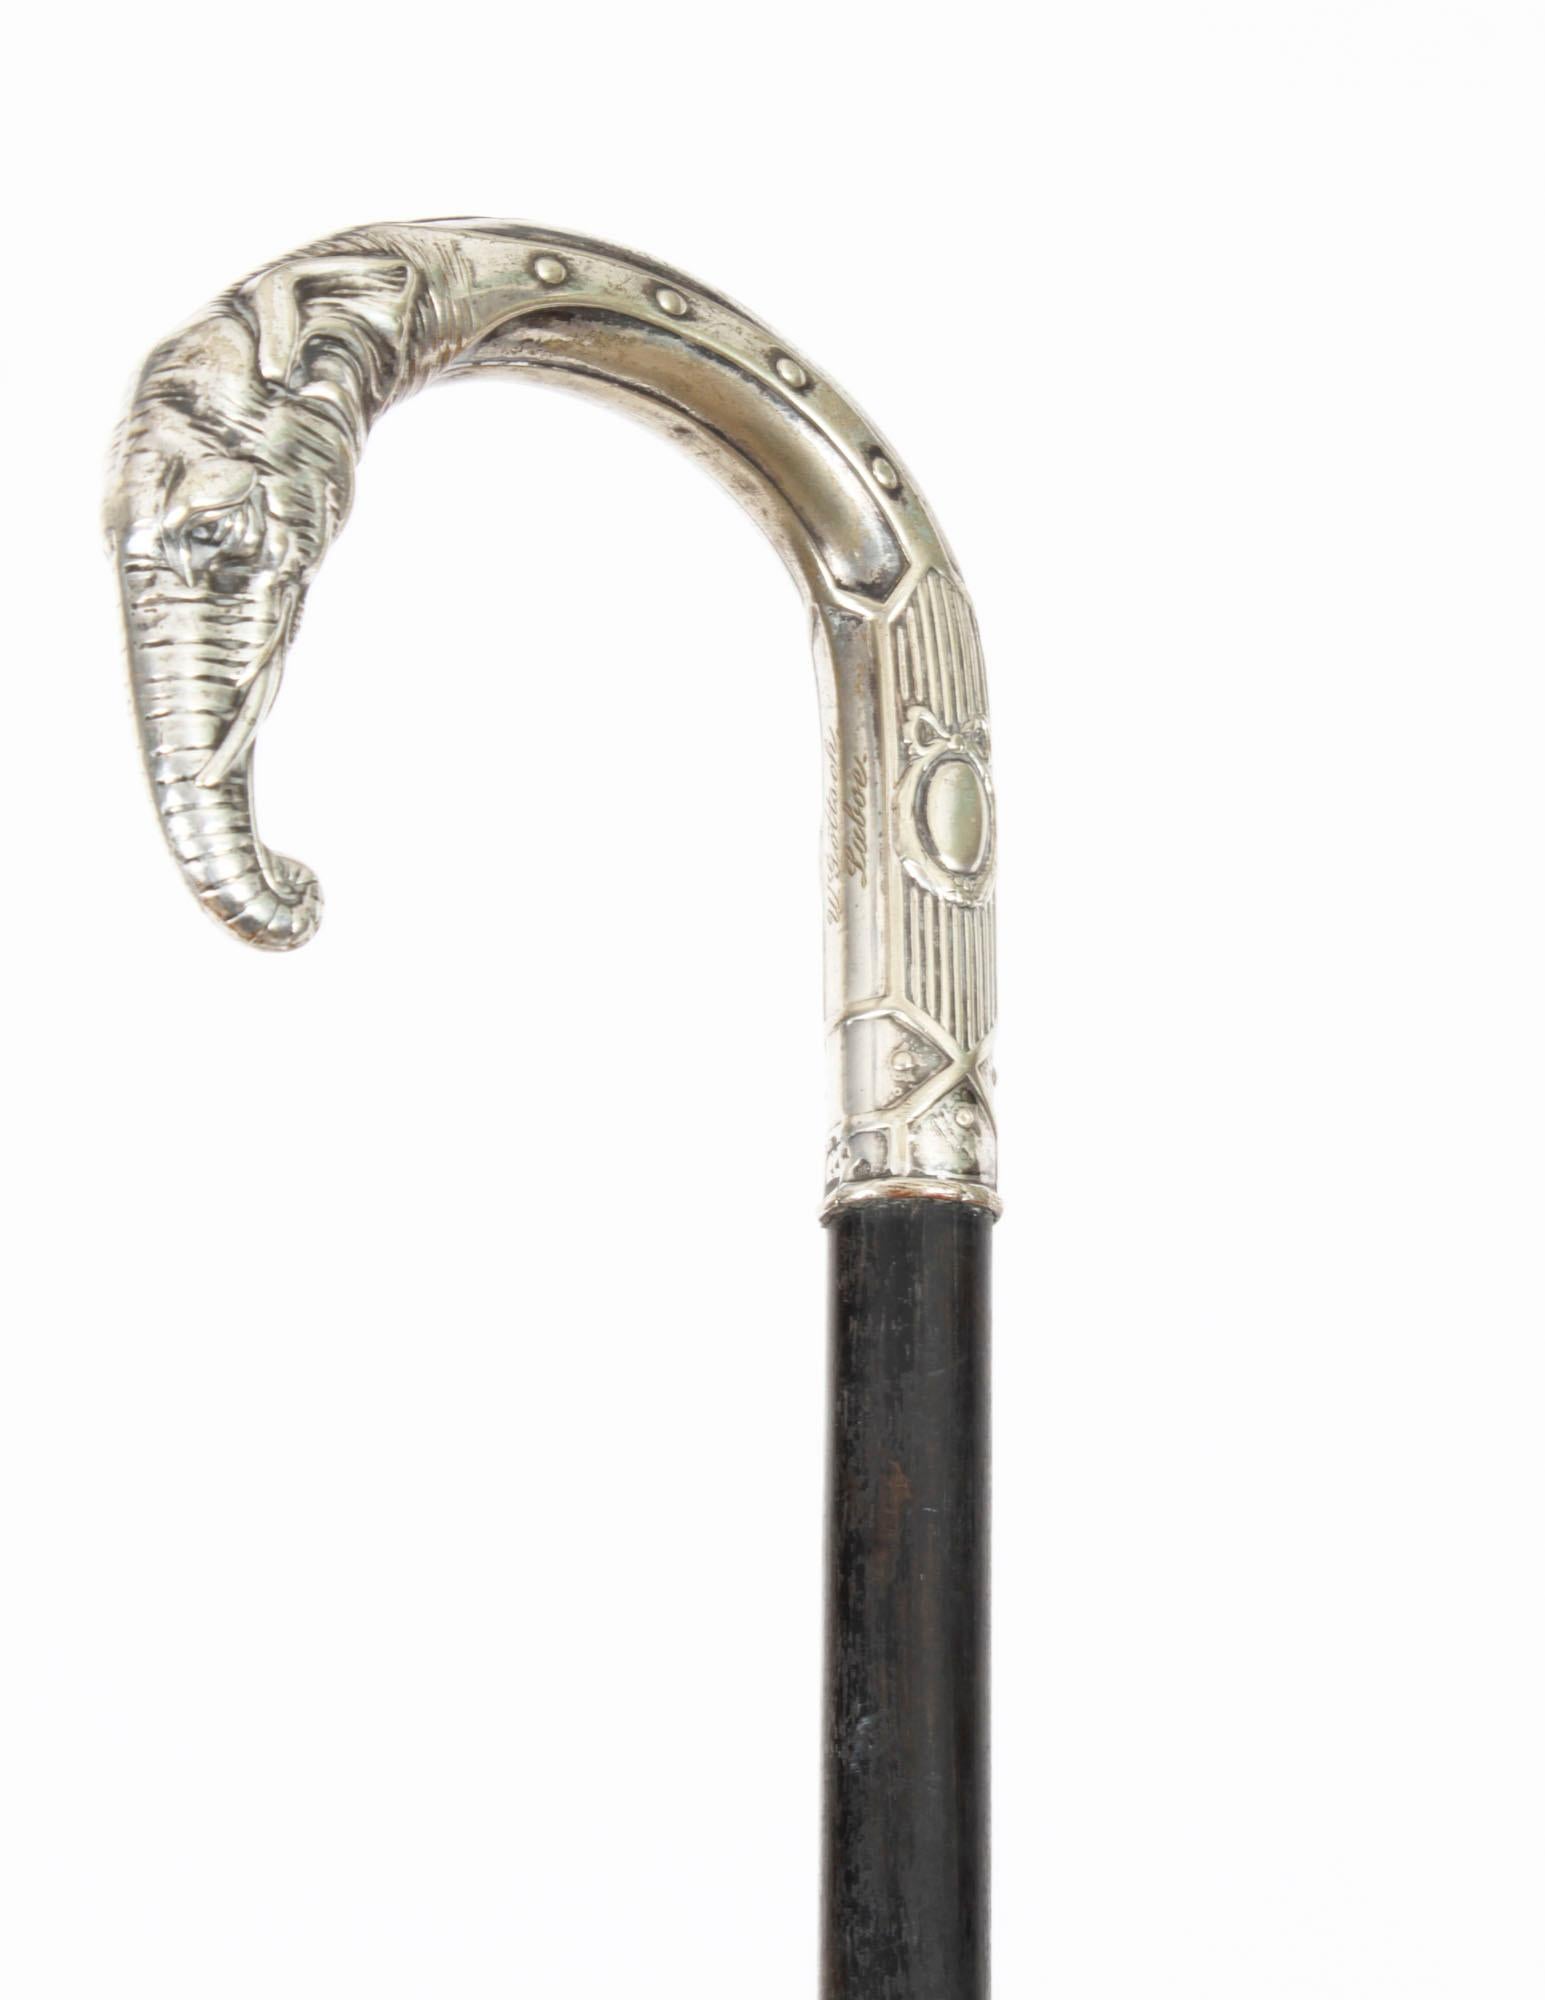 A decorative French walking stick with a stunning silver handle cast in the form of a stylised elephant head, Circa 1890 in date.
 
It has a very decorative silver handle decorated with foliate ornamentation which is cast with great attention to